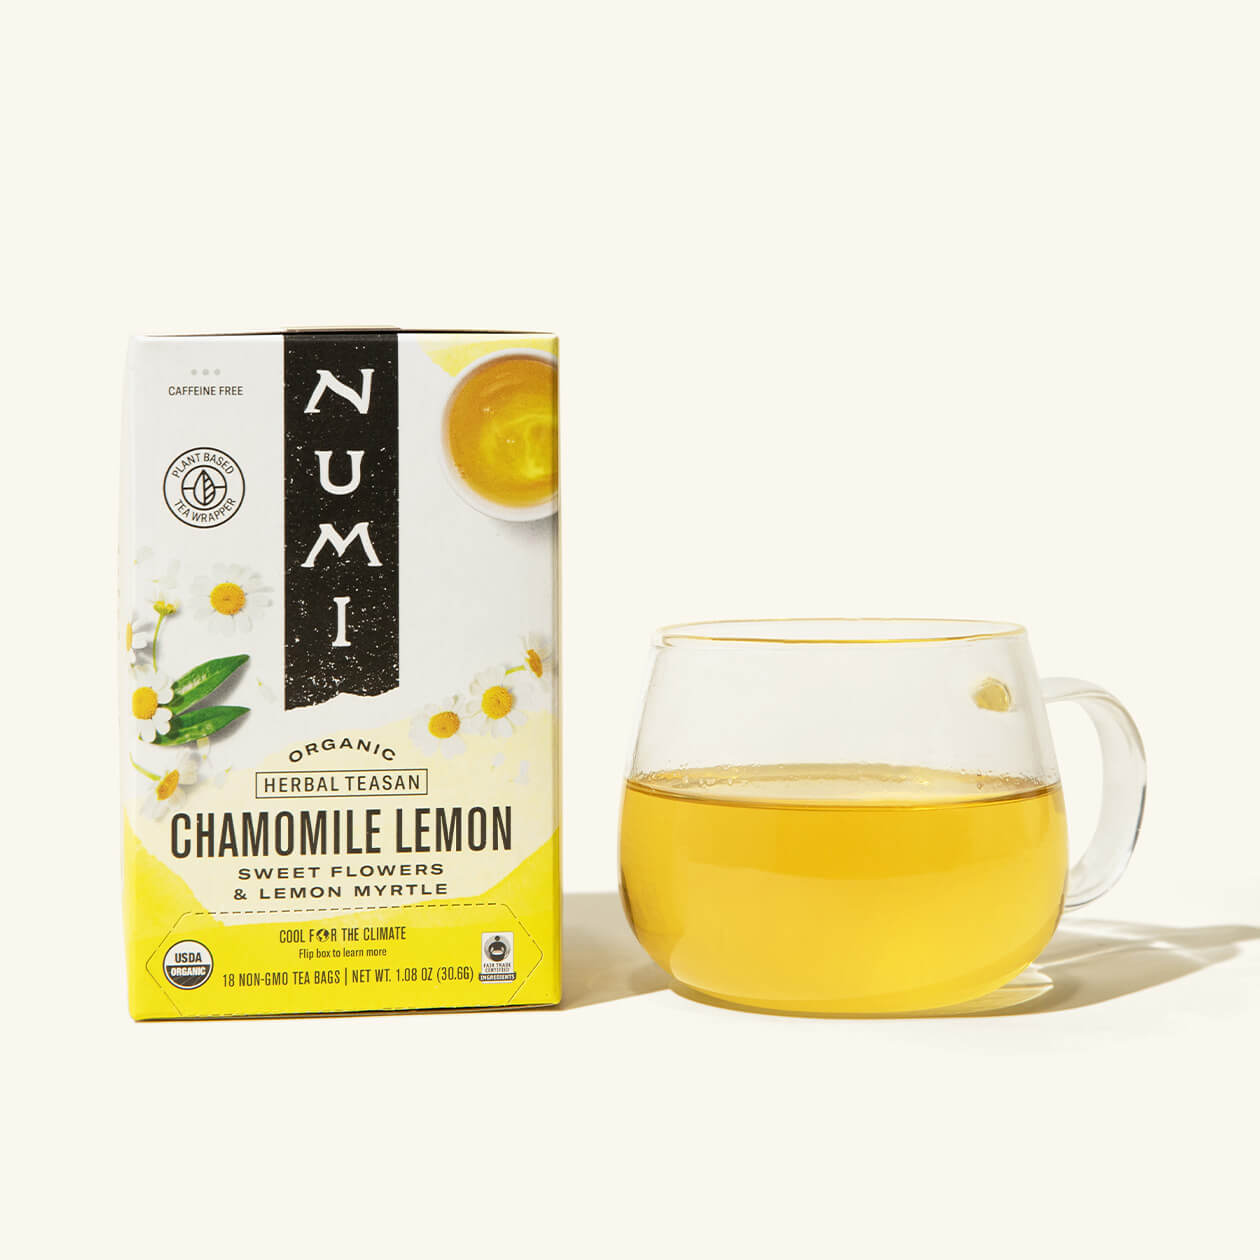 A box of Numi's Chamomile Lemon next to a brewed cup of tea in a clear cup